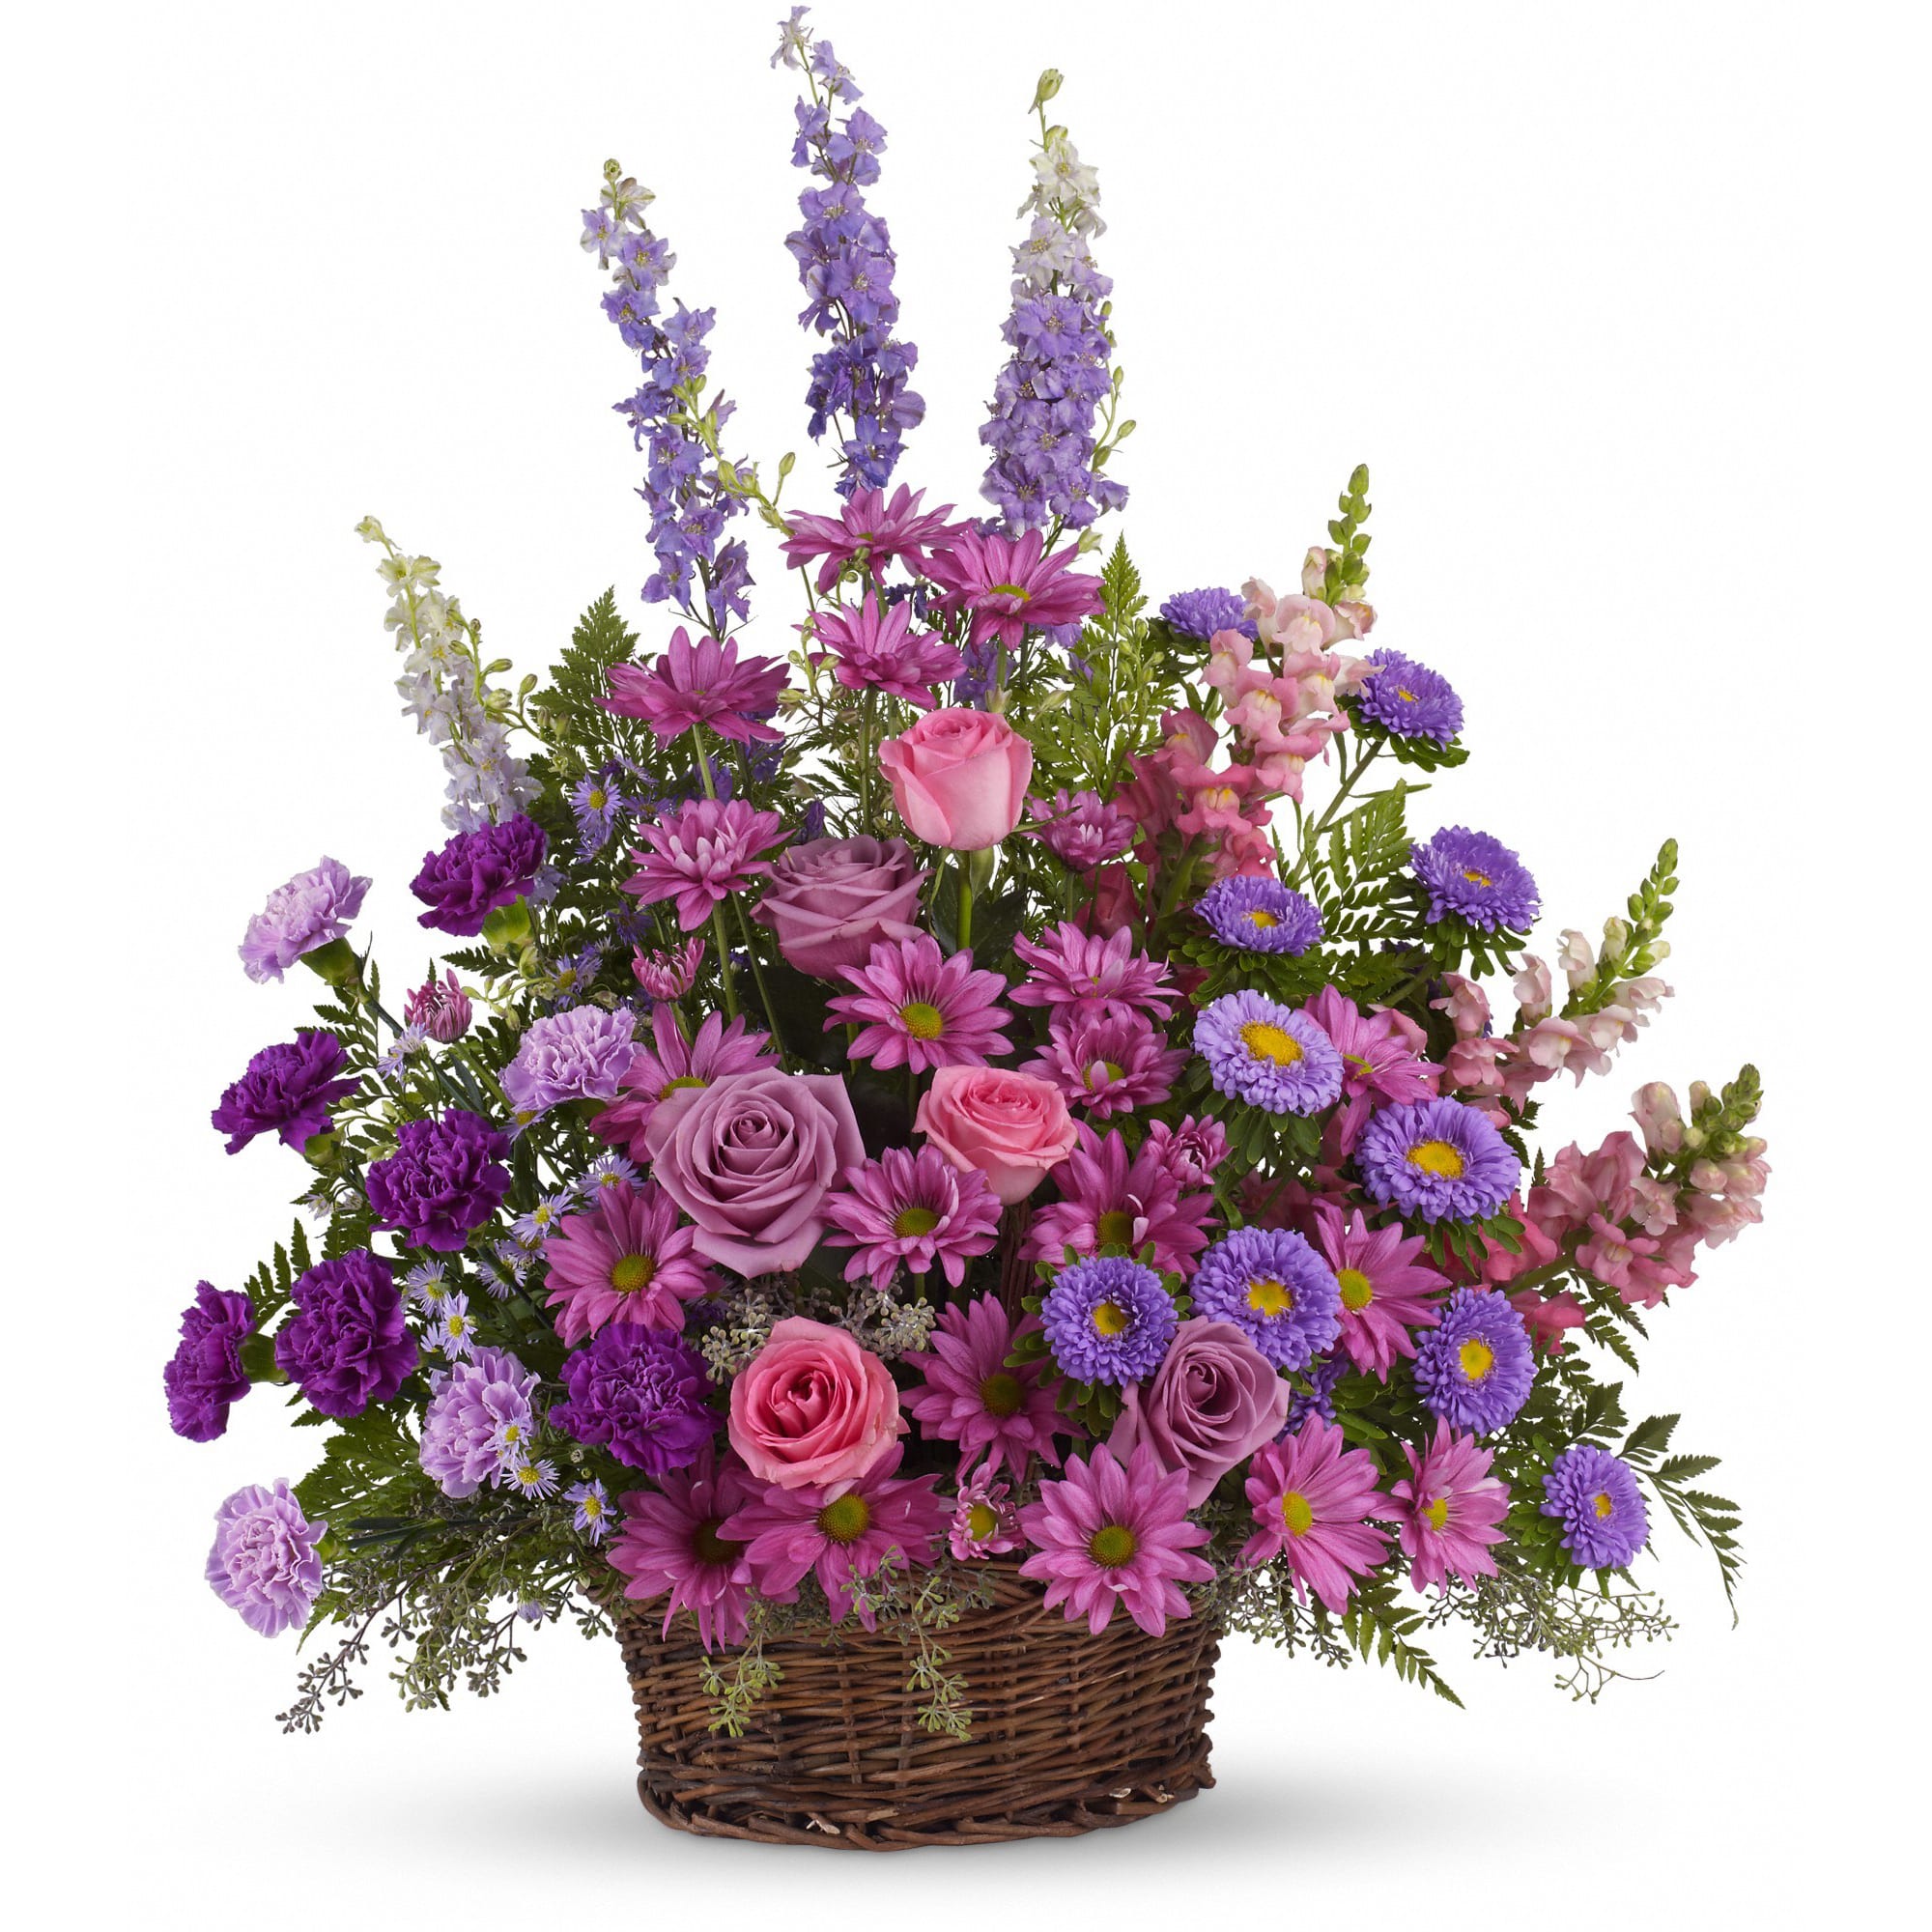 Gracious Lavender Basket by Teleflora - Soothing lavender, respectful purple and compassionate pinks are combined beautifully in this basket overflowing with pretty flowers, sincerity and sympathy. A lovely way to share your thoughts and pay tribute to someone special. 